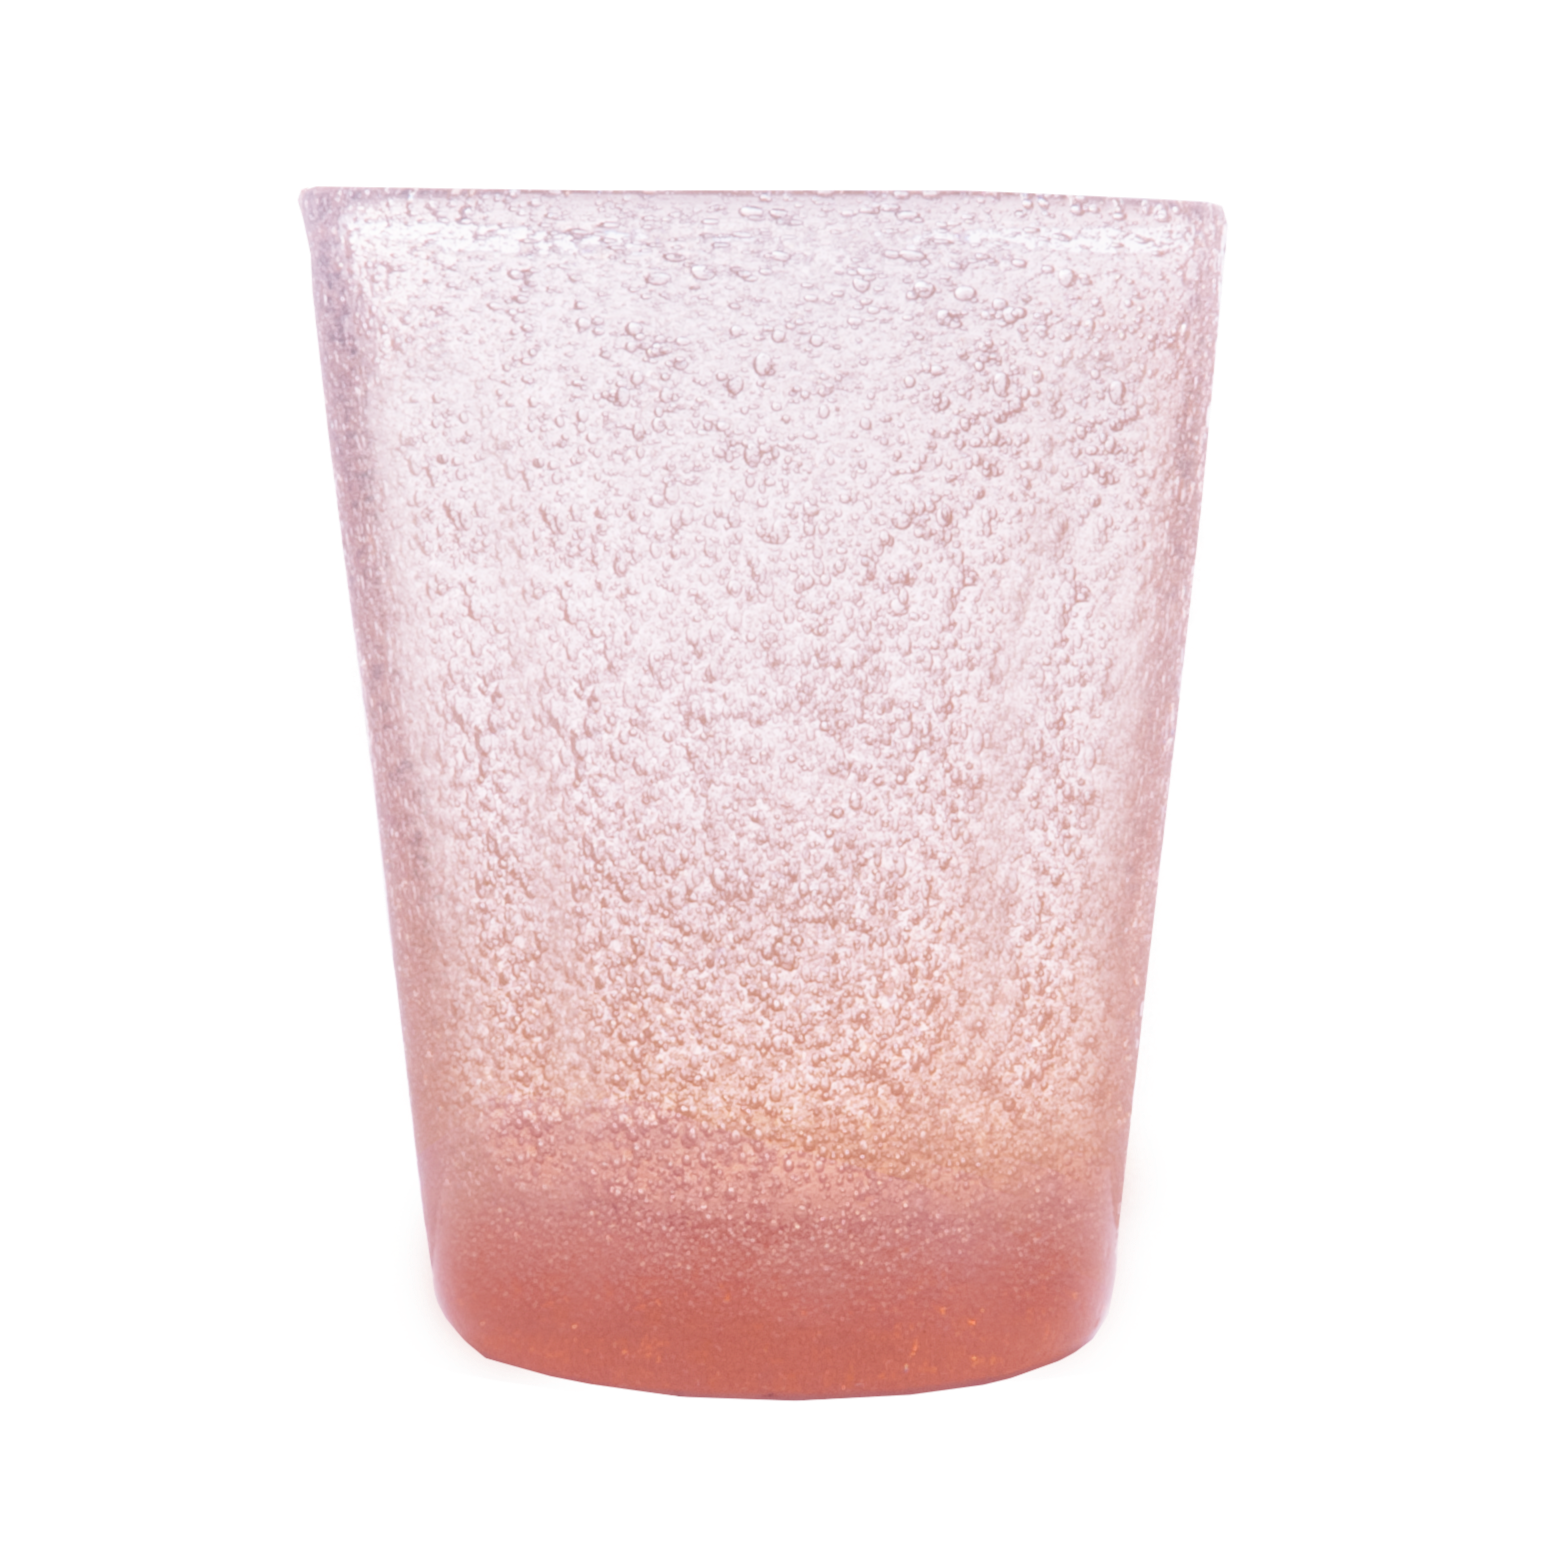 Cheerful, versatile coloured drinking glasses from Memento in Italy. For summer entertaining and everyday use. Decorative bubbles in the glass itself. Colour: Peach